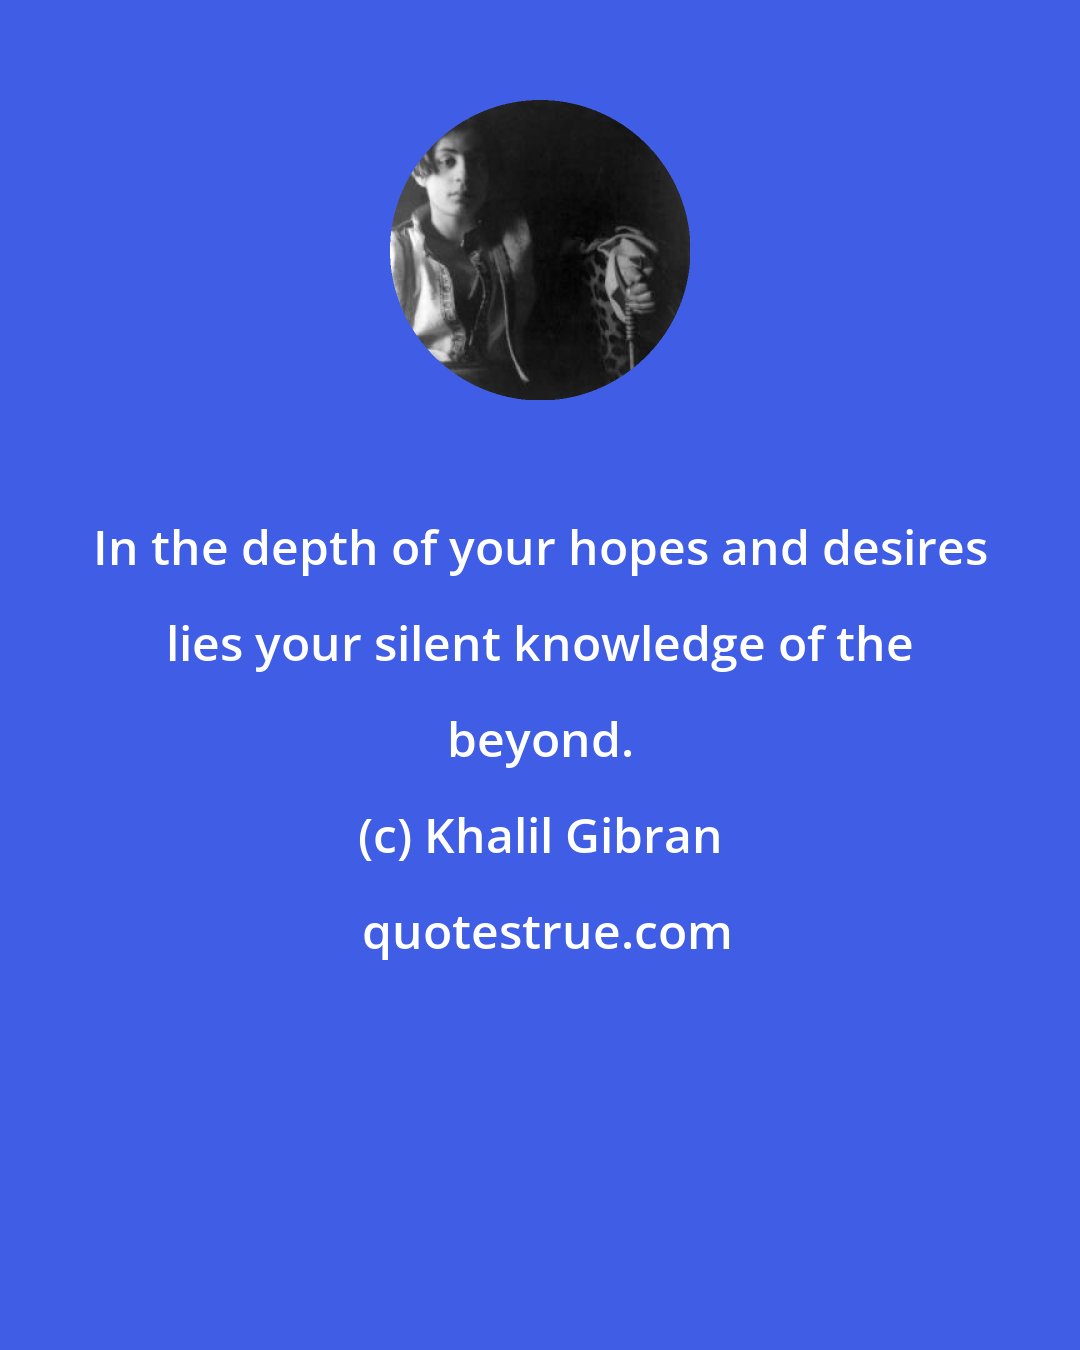 Khalil Gibran: In the depth of your hopes and desires lies your silent knowledge of the beyond.